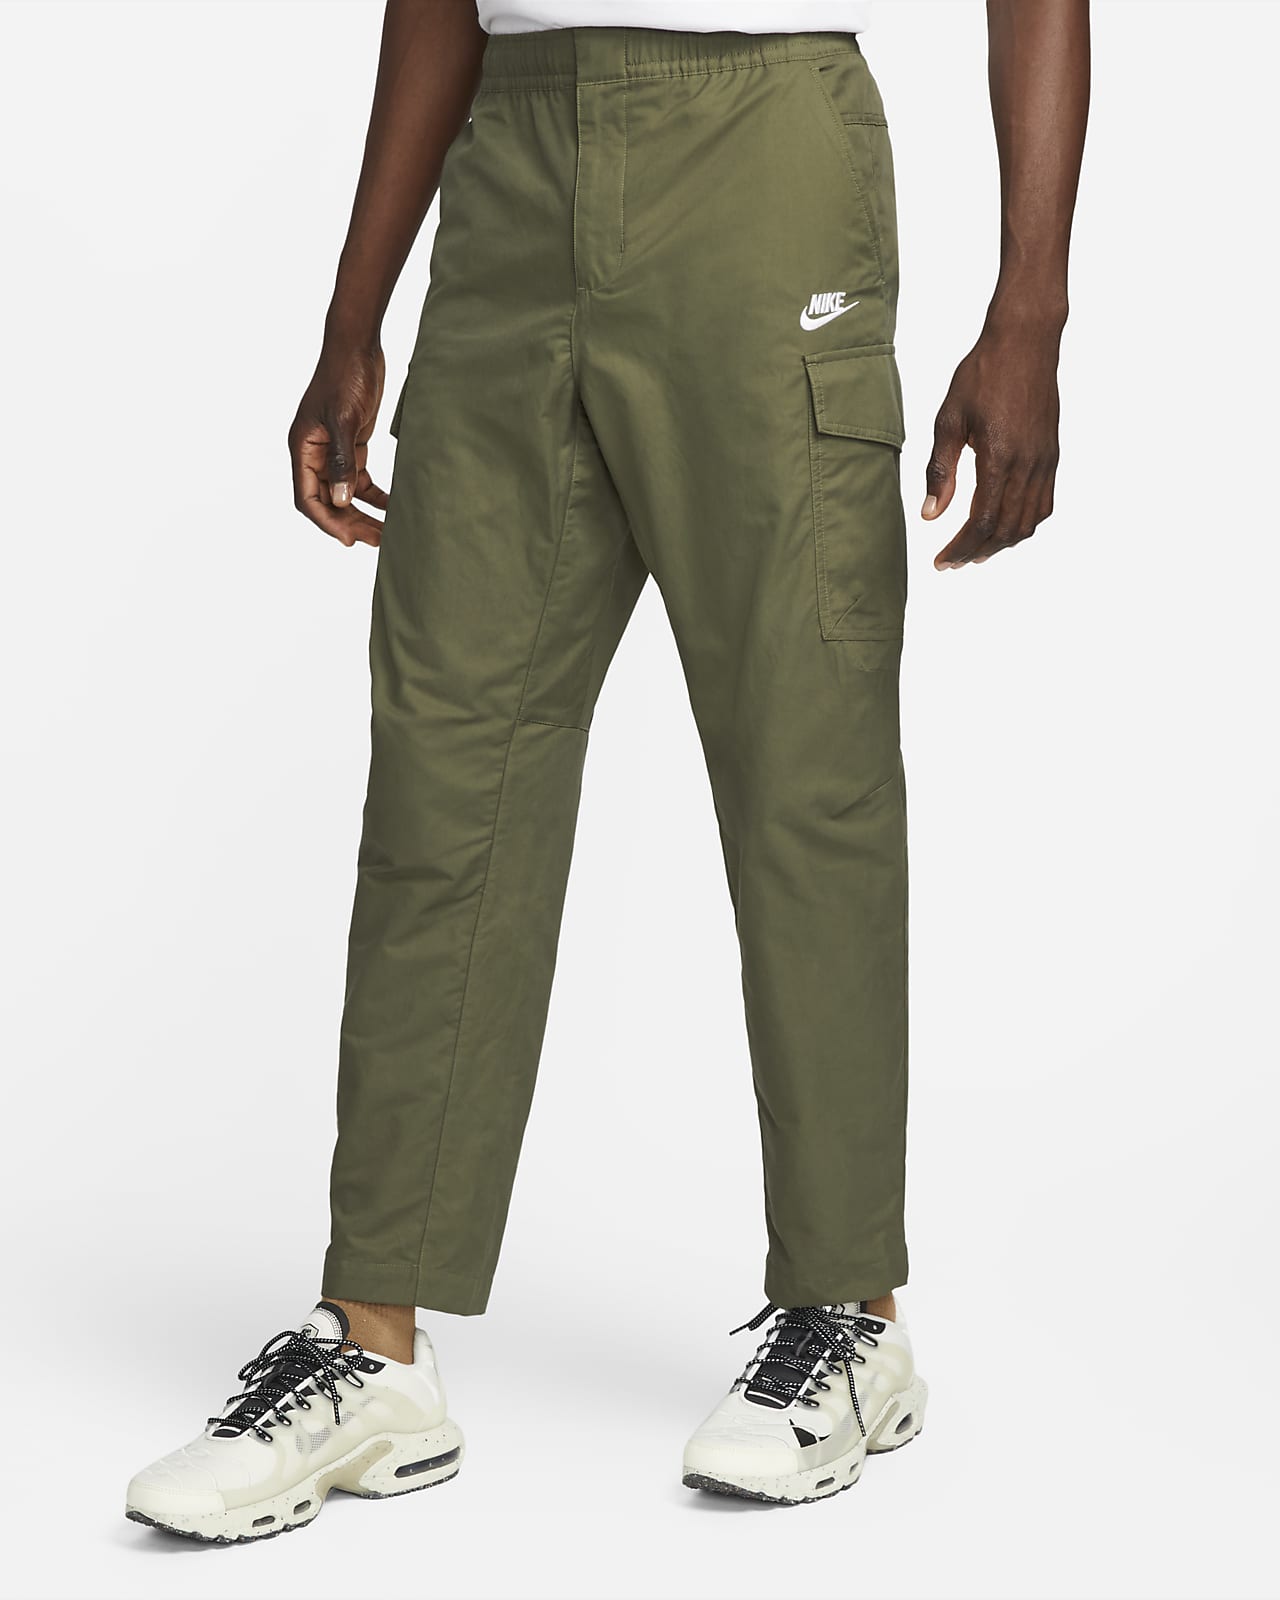 APEY Joggers For Men Stretchy Slim Fit Tracksuit Pants Sweatpants For Men |  Buy Online in South Africa | takealot.com